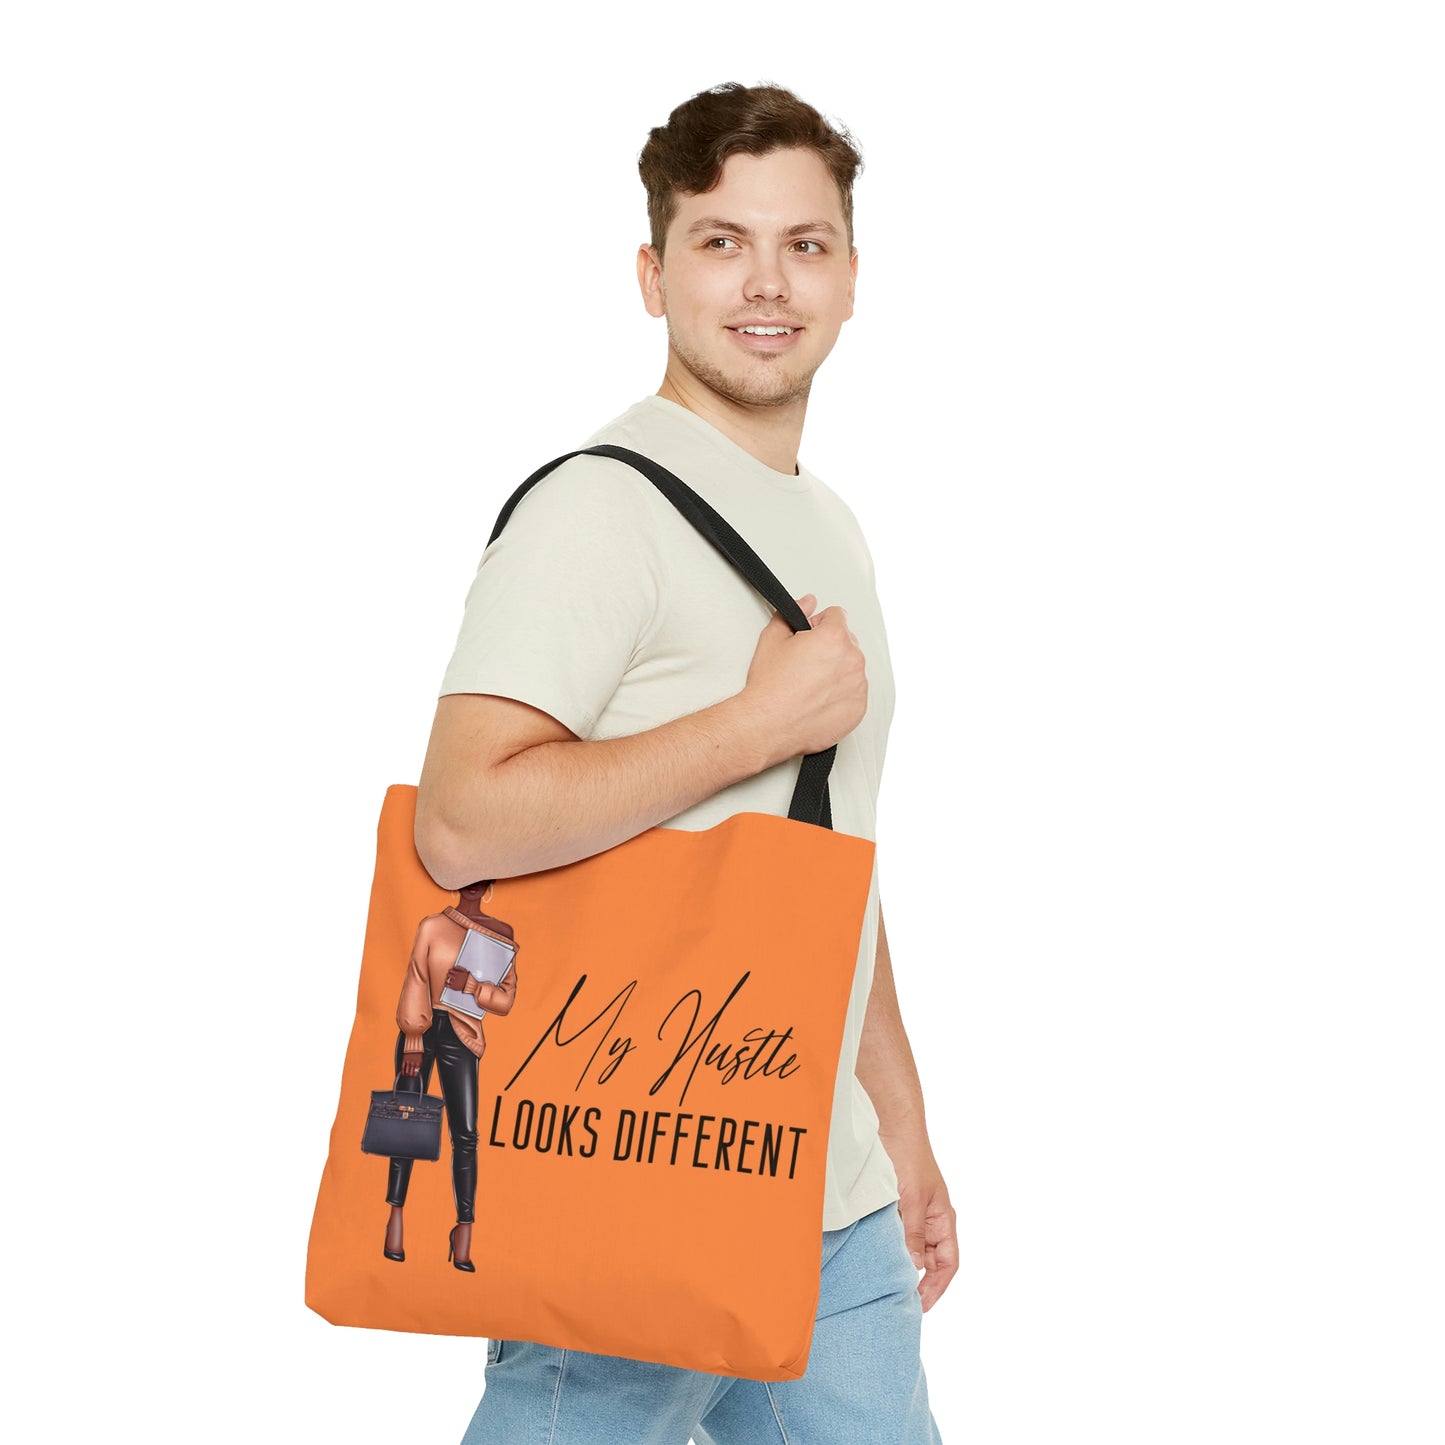 My Hustle Looks Different (Peach and African American) Tote Bag